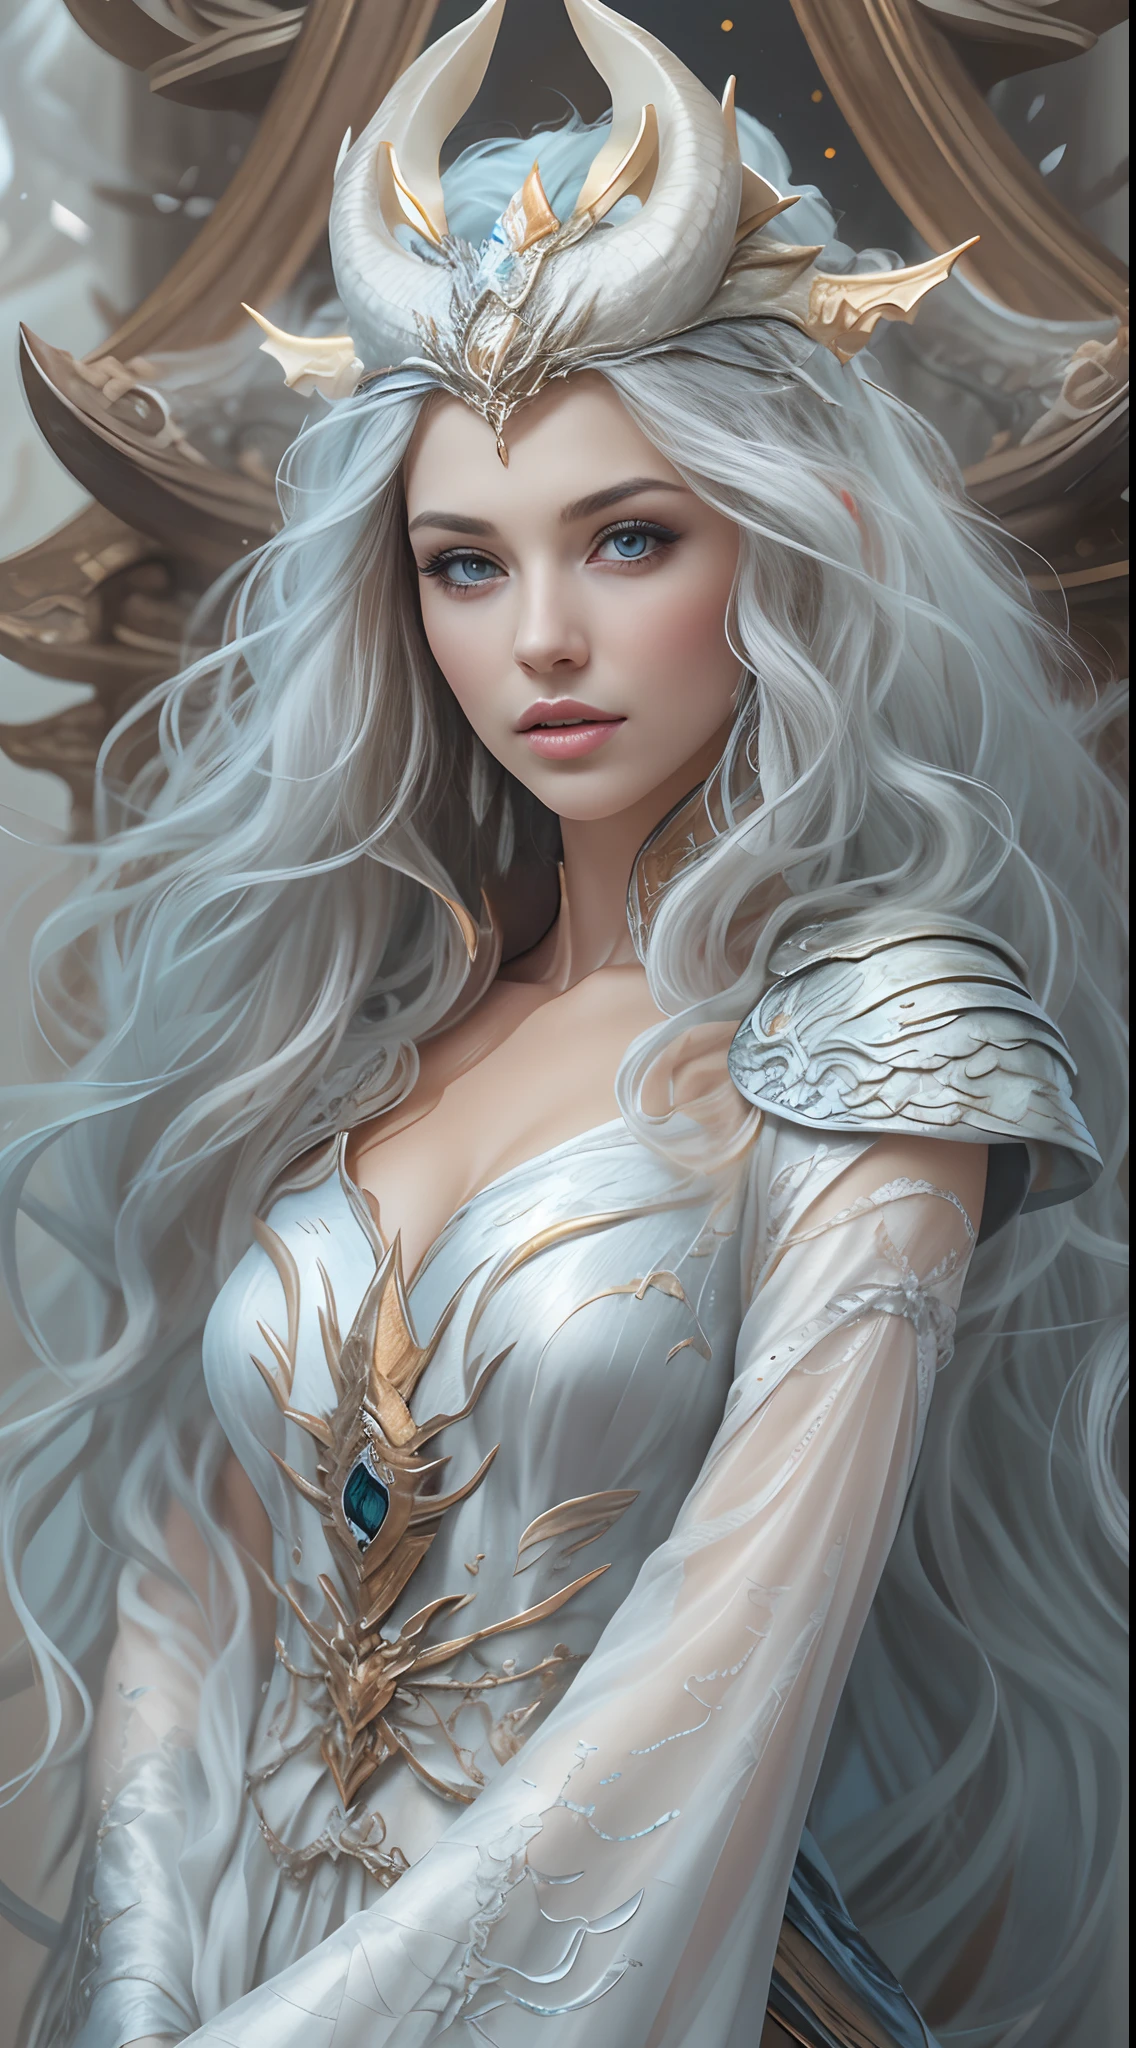 unreal engine:1.4,UHD,The best quality:1.4, photorealistic:1.4, skin texture:1.4, Masterpiece:1.8,White Dragon Queen, young and mature woman, Long elf ears, elegant dress, big chest, curve, Dragon Ling Vawy Hair, super long hair, Smooth Face Features, White dragon horns on his head, majestic woman, silver decoration om your dress, Silver Star Queen,big blue eyes, Cherry Lips, white dragons:1.4, starry sky,detailed hands,